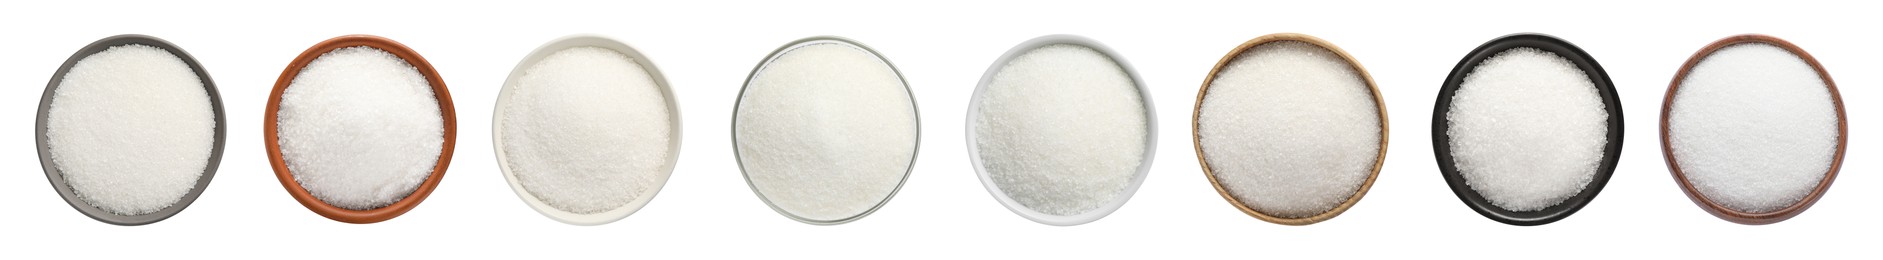 Set with granulated sugar on white background, top view. Banner design